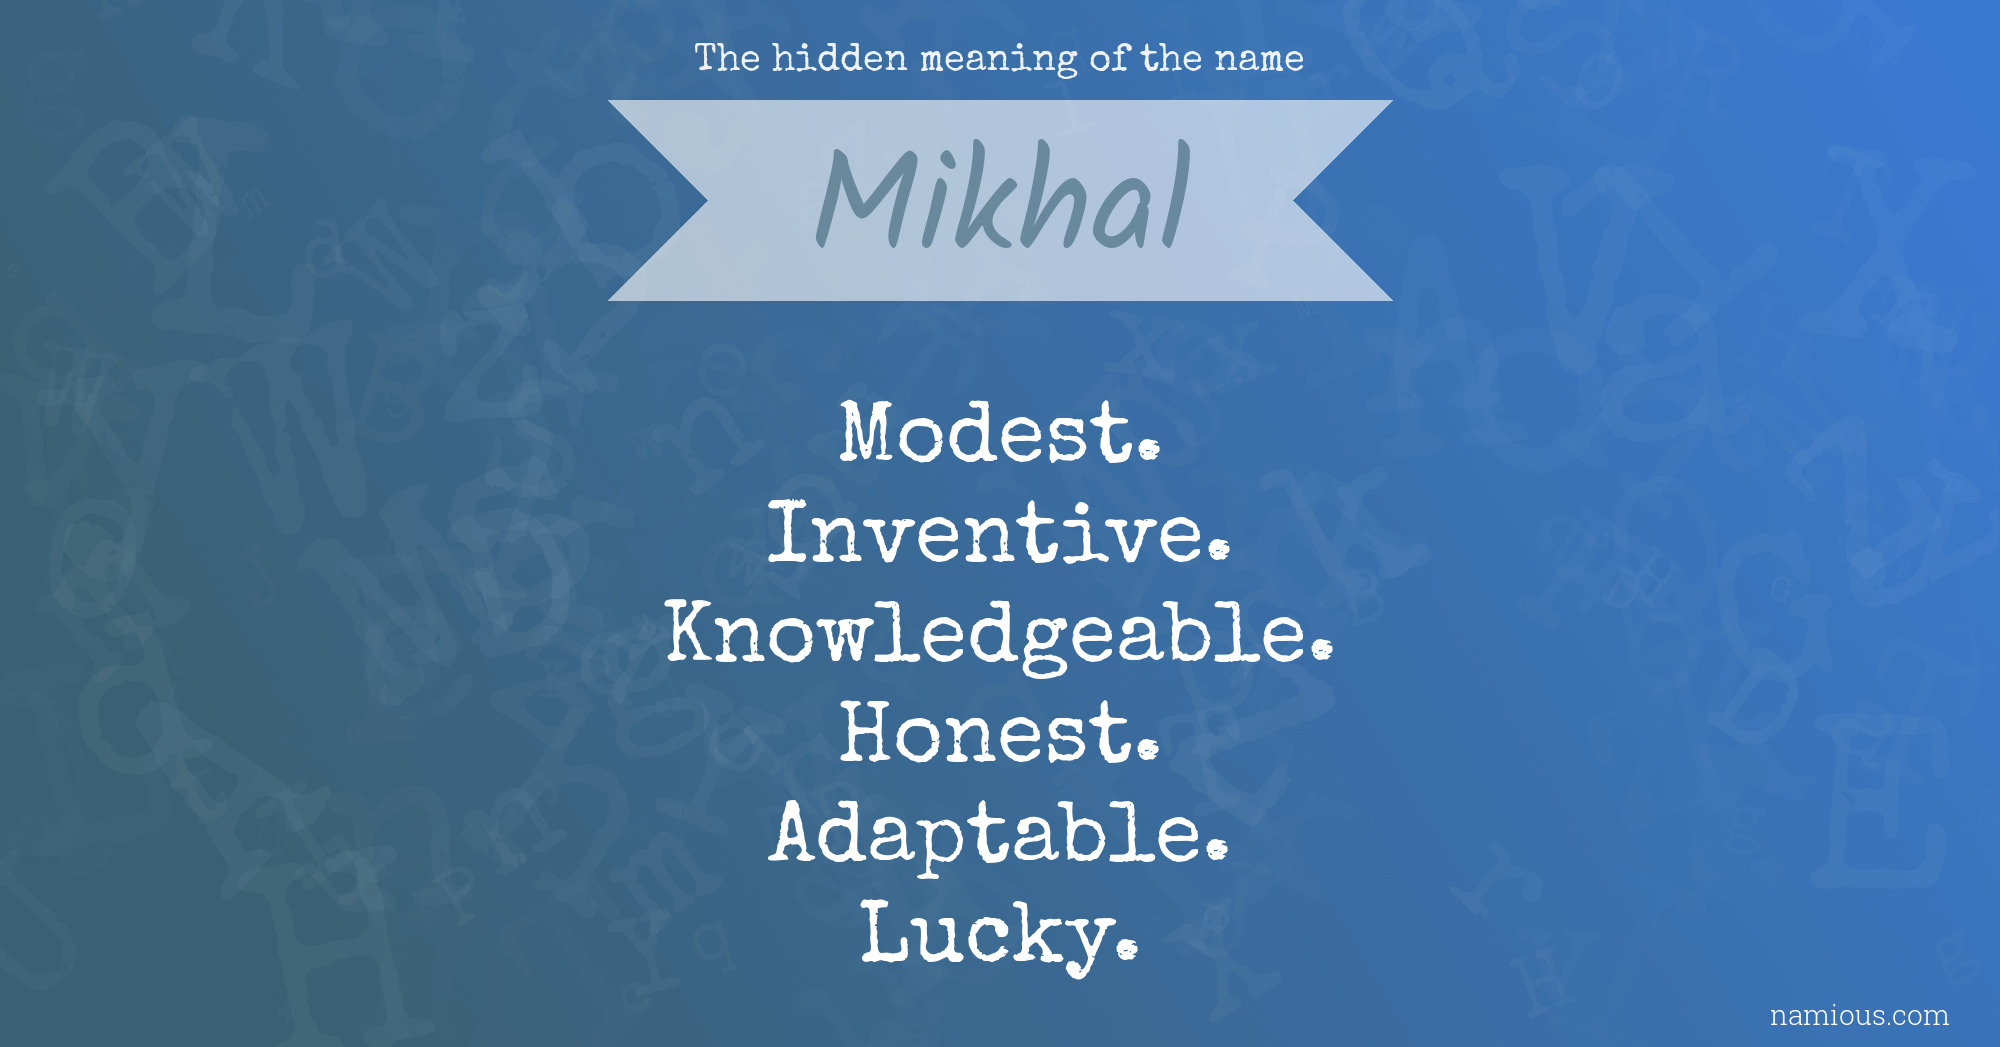 The hidden meaning of the name Mikhal